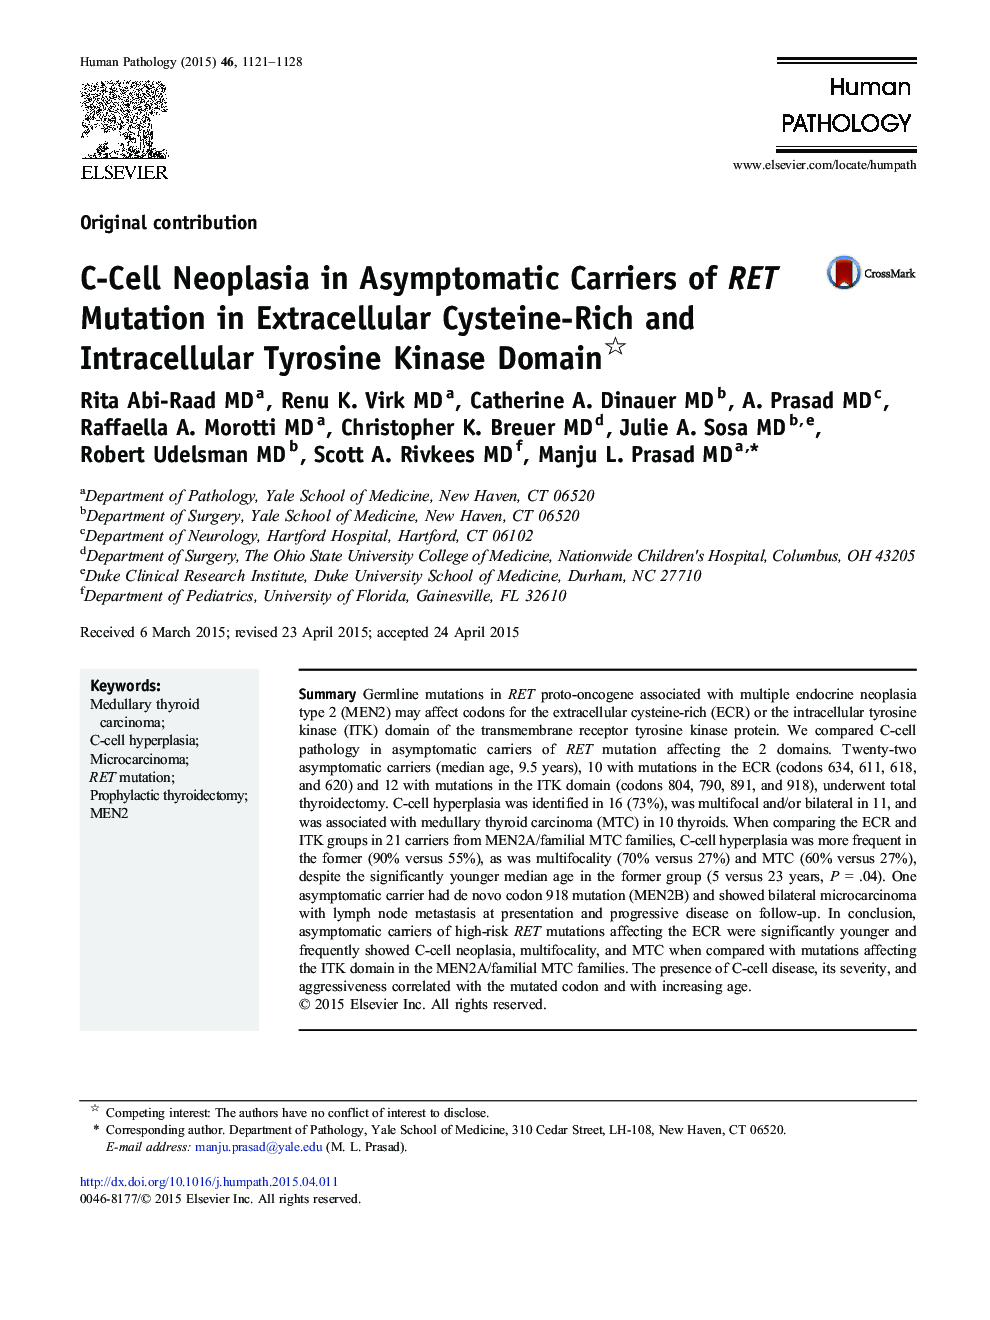 C-Cell Neoplasia in Asymptomatic Carriers of RET Mutation in Extracellular Cysteine-Rich and Intracellular Tyrosine Kinase Domain 